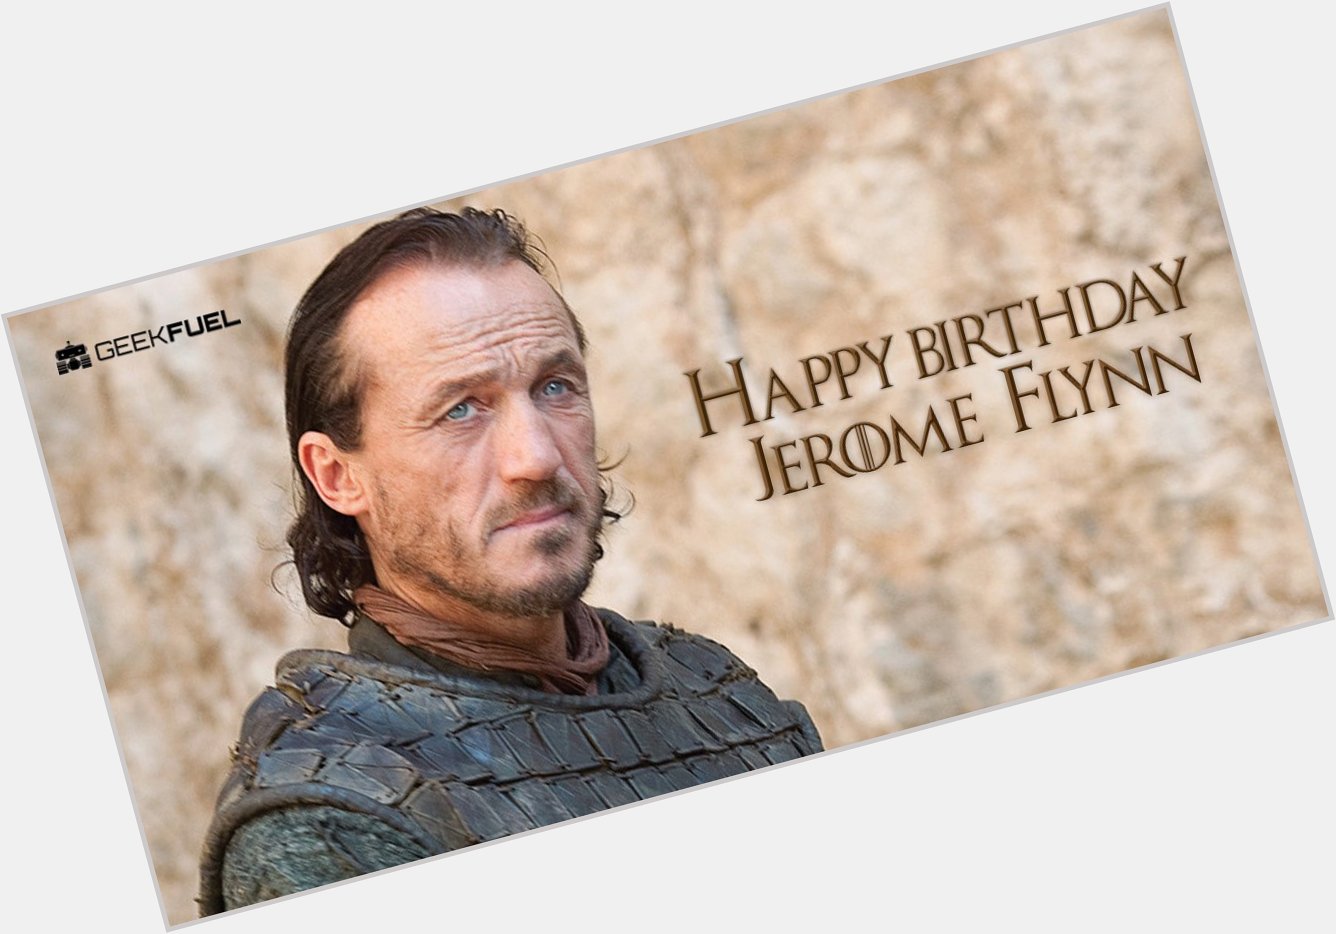 Happy Birthday to Jerome Flynn aka Bronn from Game of Thrones.

Who\s excited for season 7? 